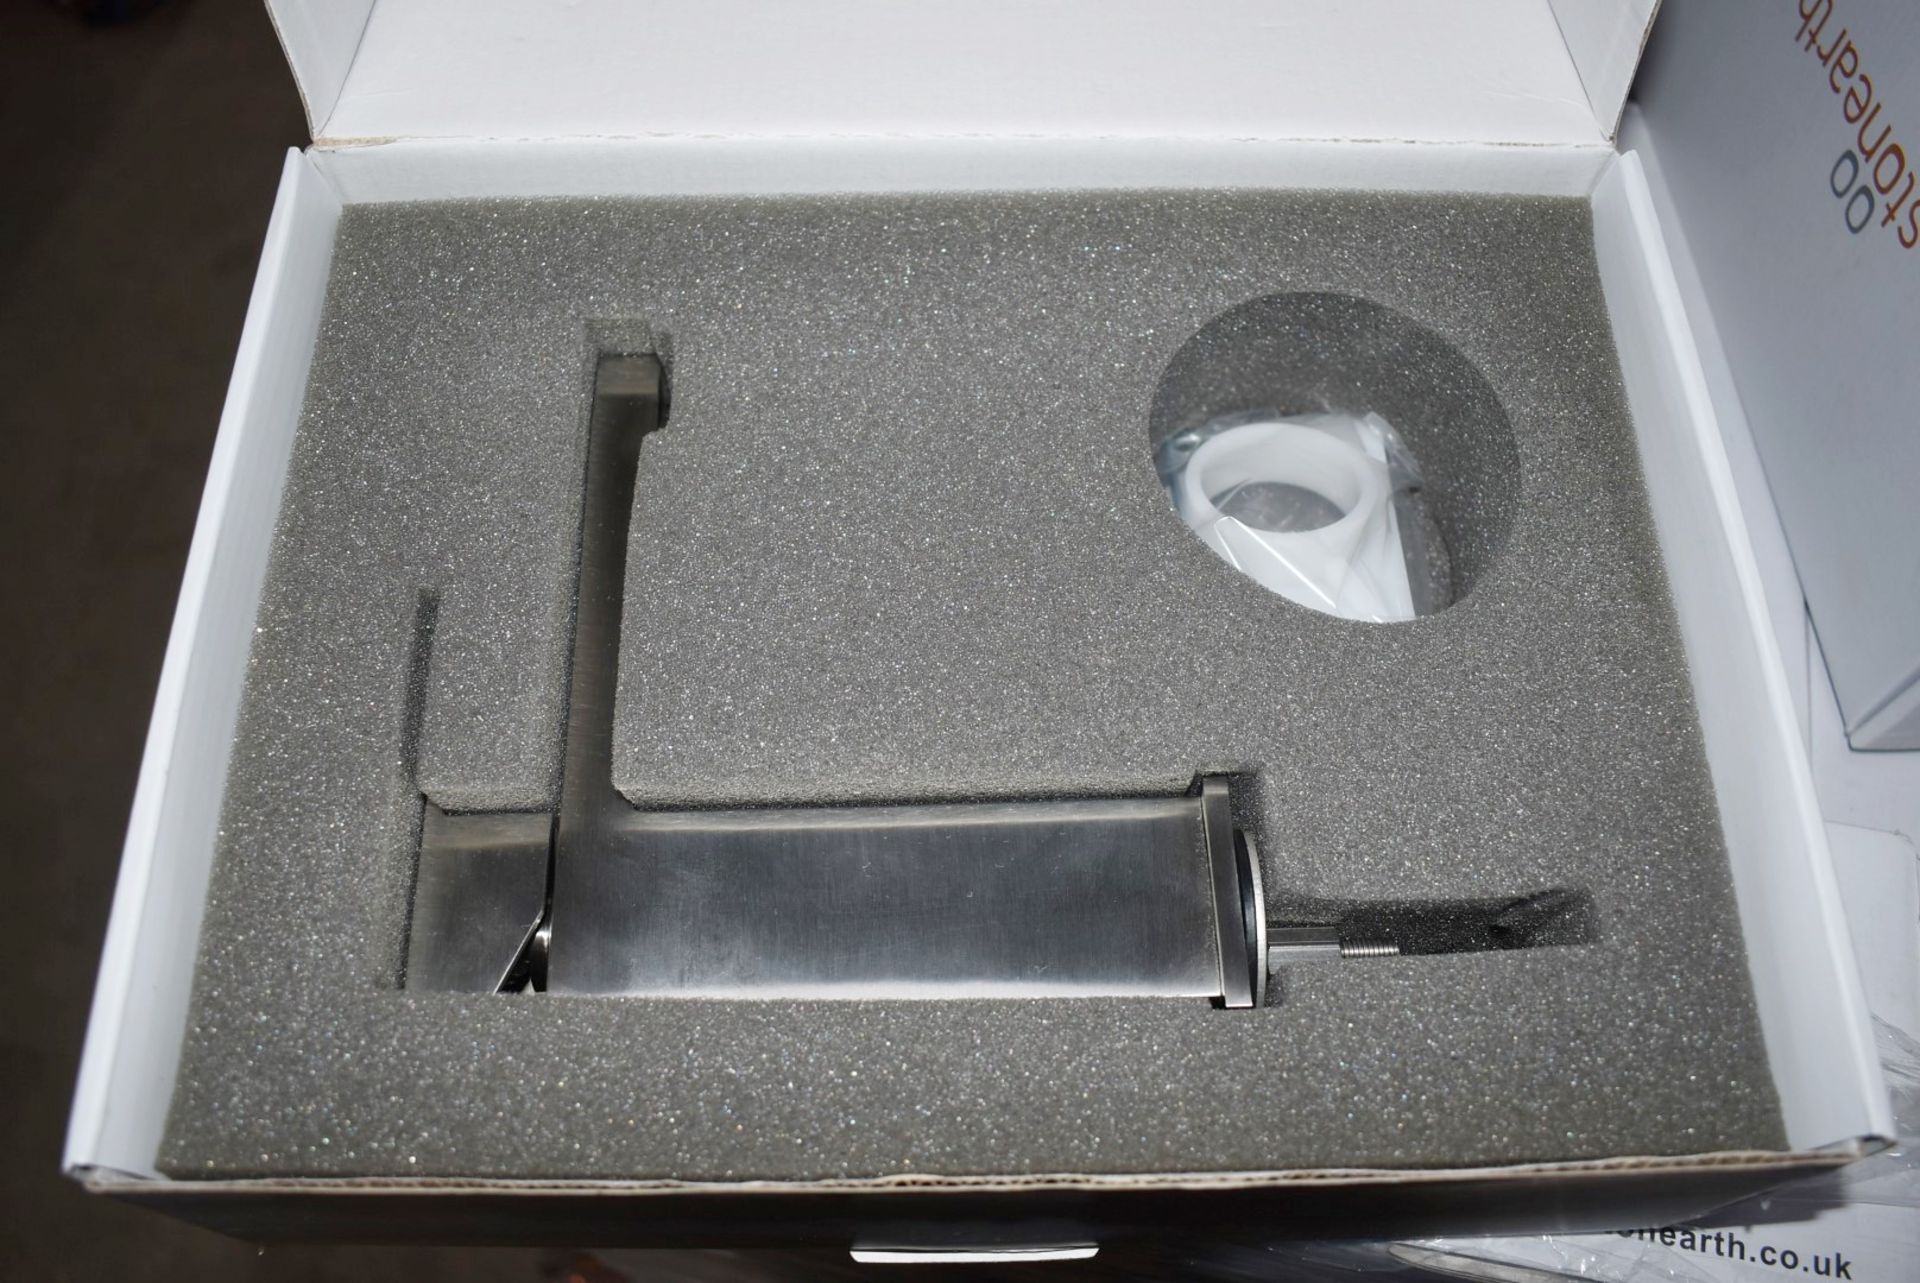 1 x Stonearth 'Metro' Stainless Steel Basin Mixer Tap - Brand New & Boxed - RRP £245 - Ref: TP821 - Image 4 of 13